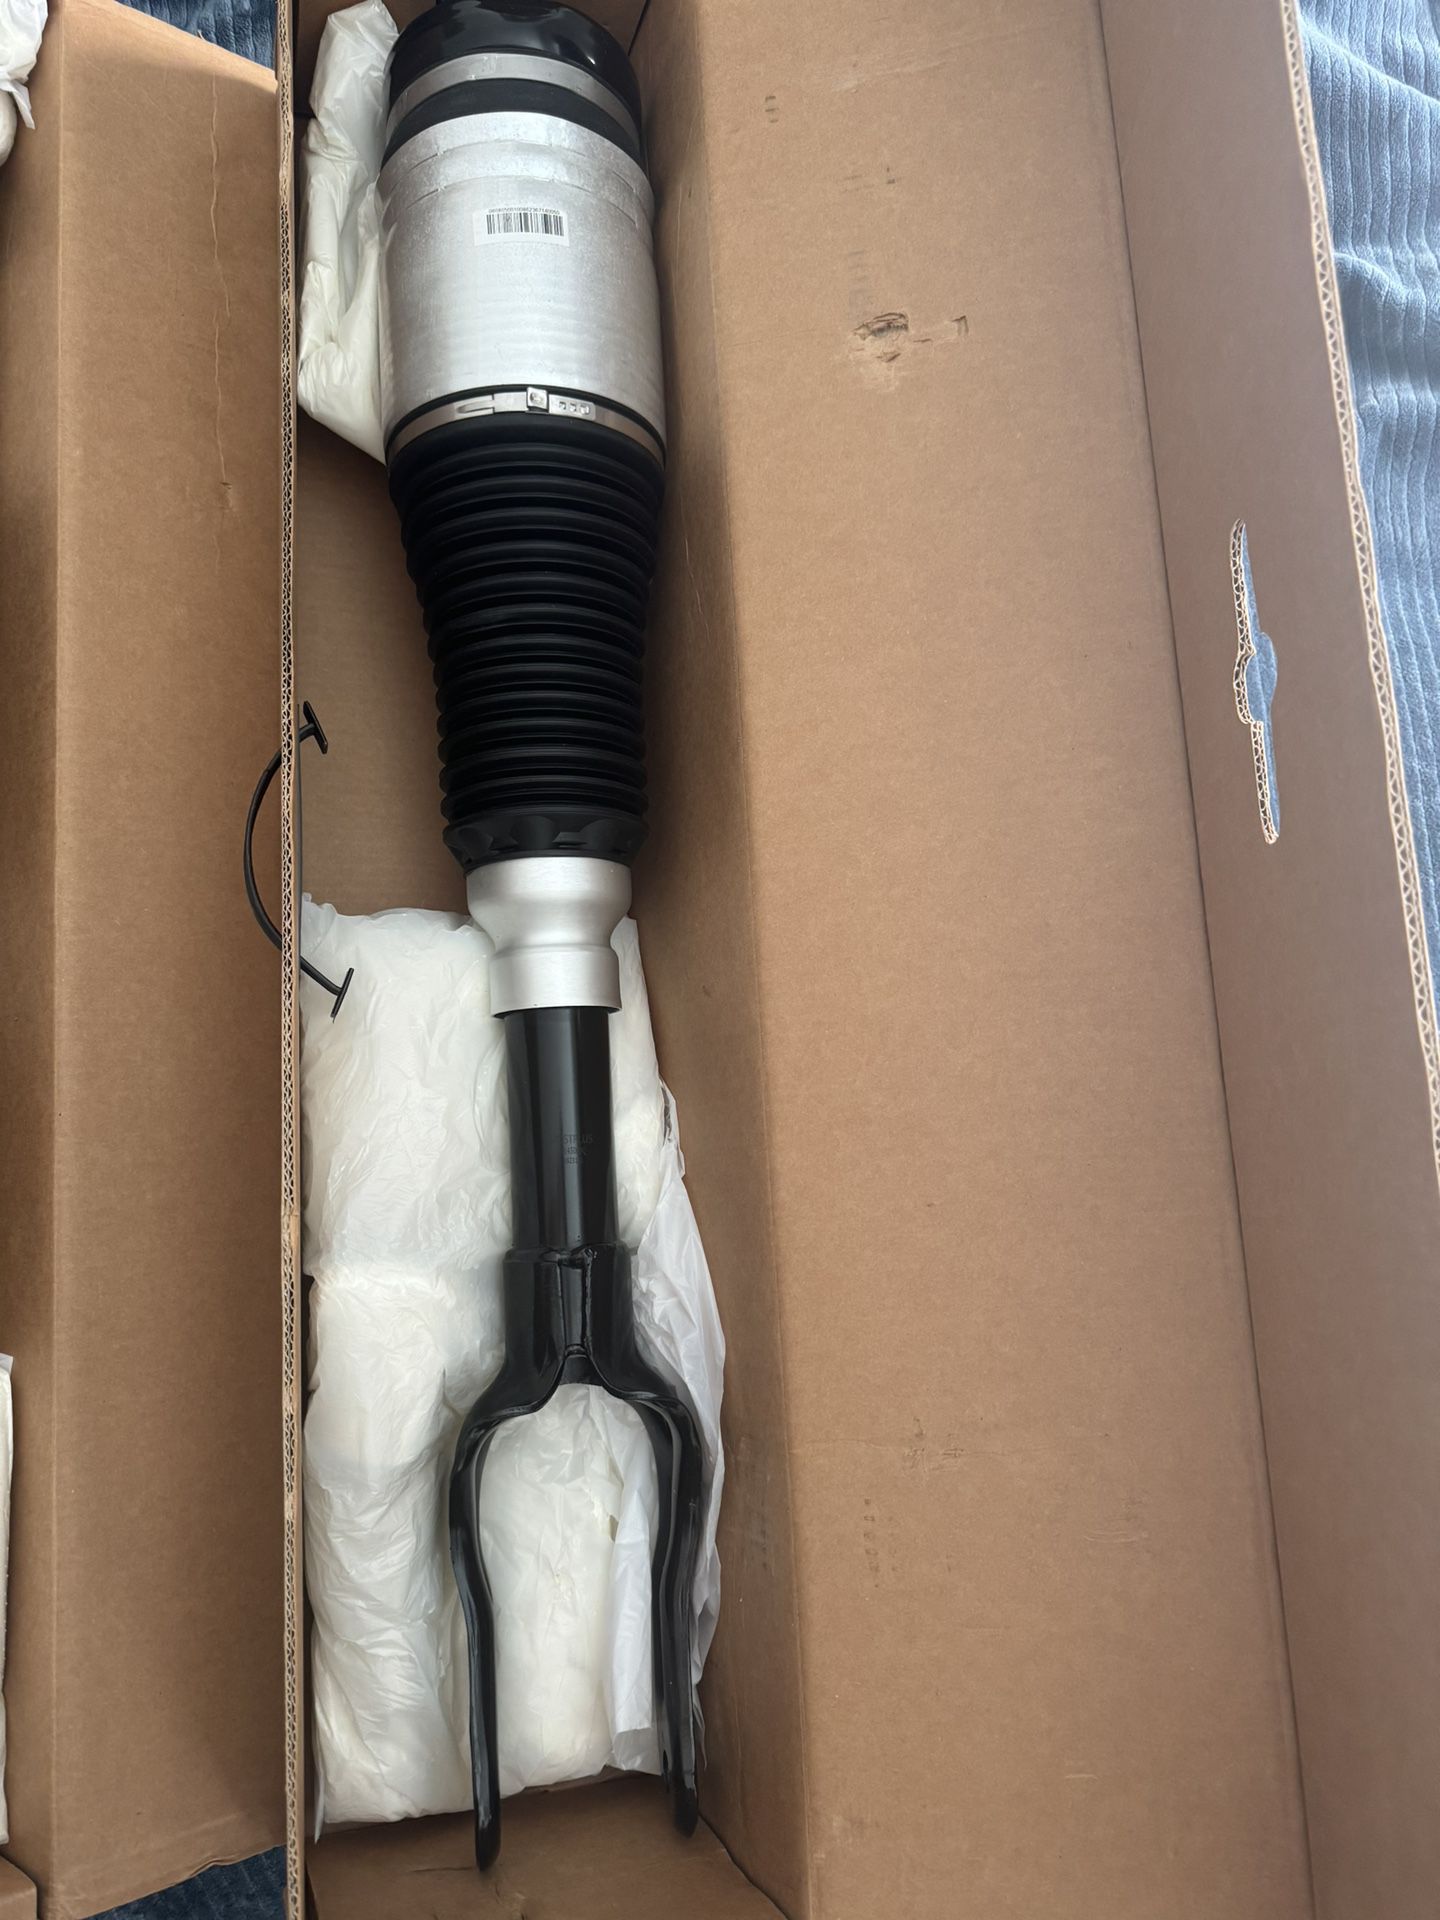 Air Suspension Strut Shock Front L For 2011-16 Jeep Grand Cherokee (contact info removed)3AE